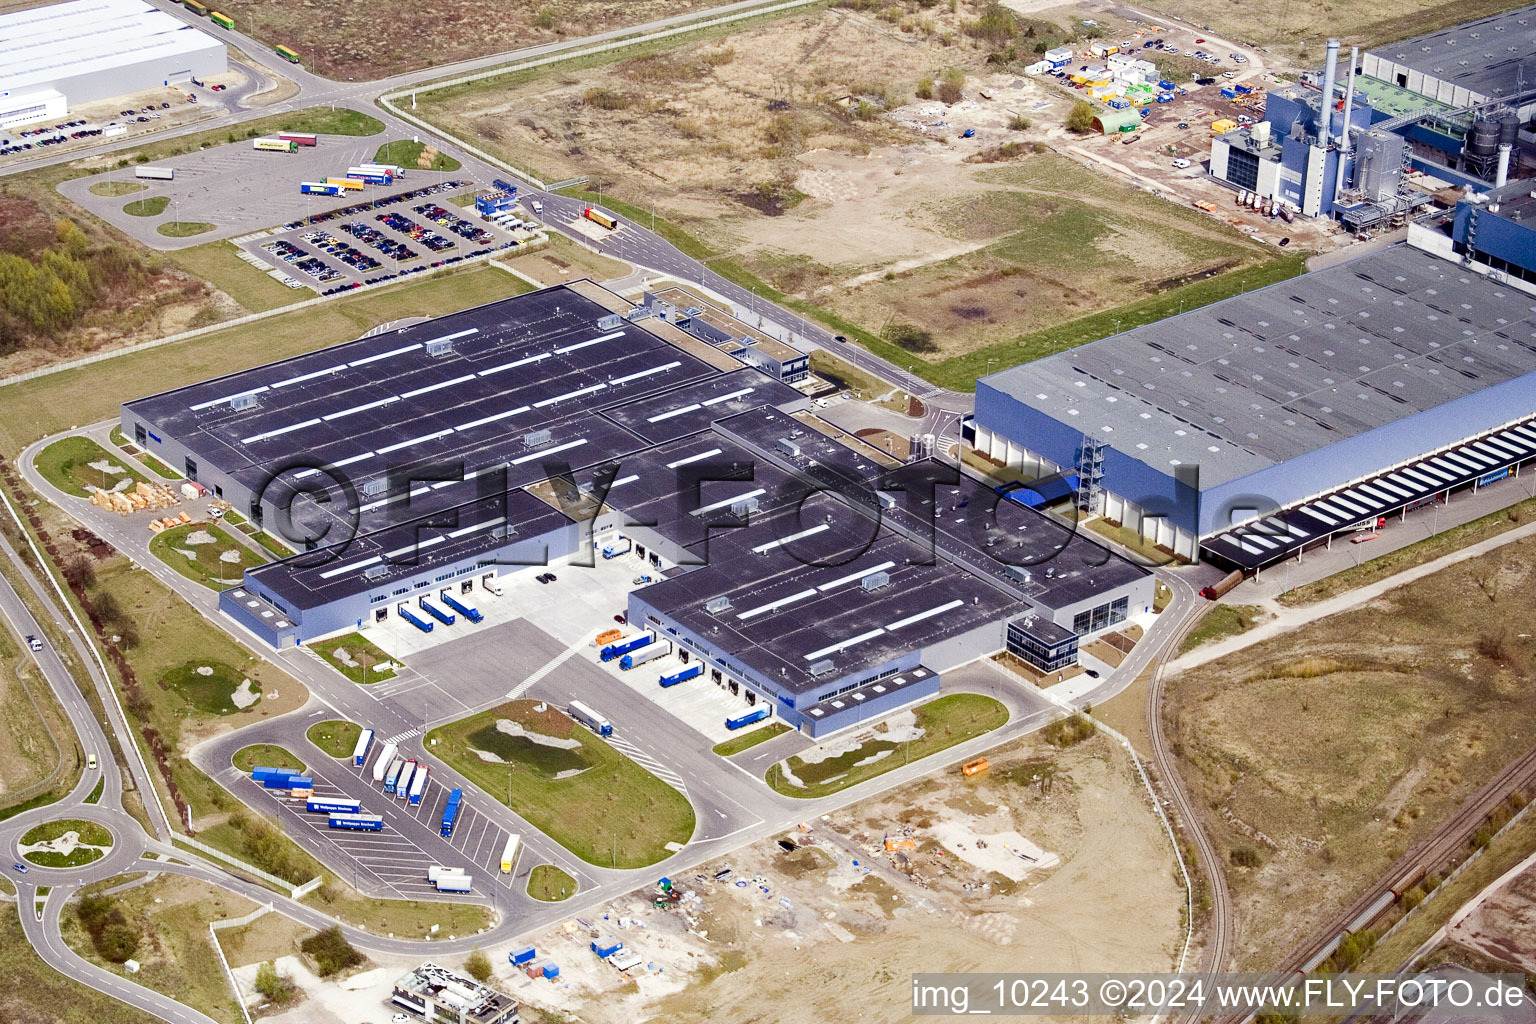 Aerial view of Building and production halls on the premises of Europack GmbH in the district Industriegebiet Woerth-Oberwald in Woerth am Rhein in the state Rhineland-Palatinate, Germany